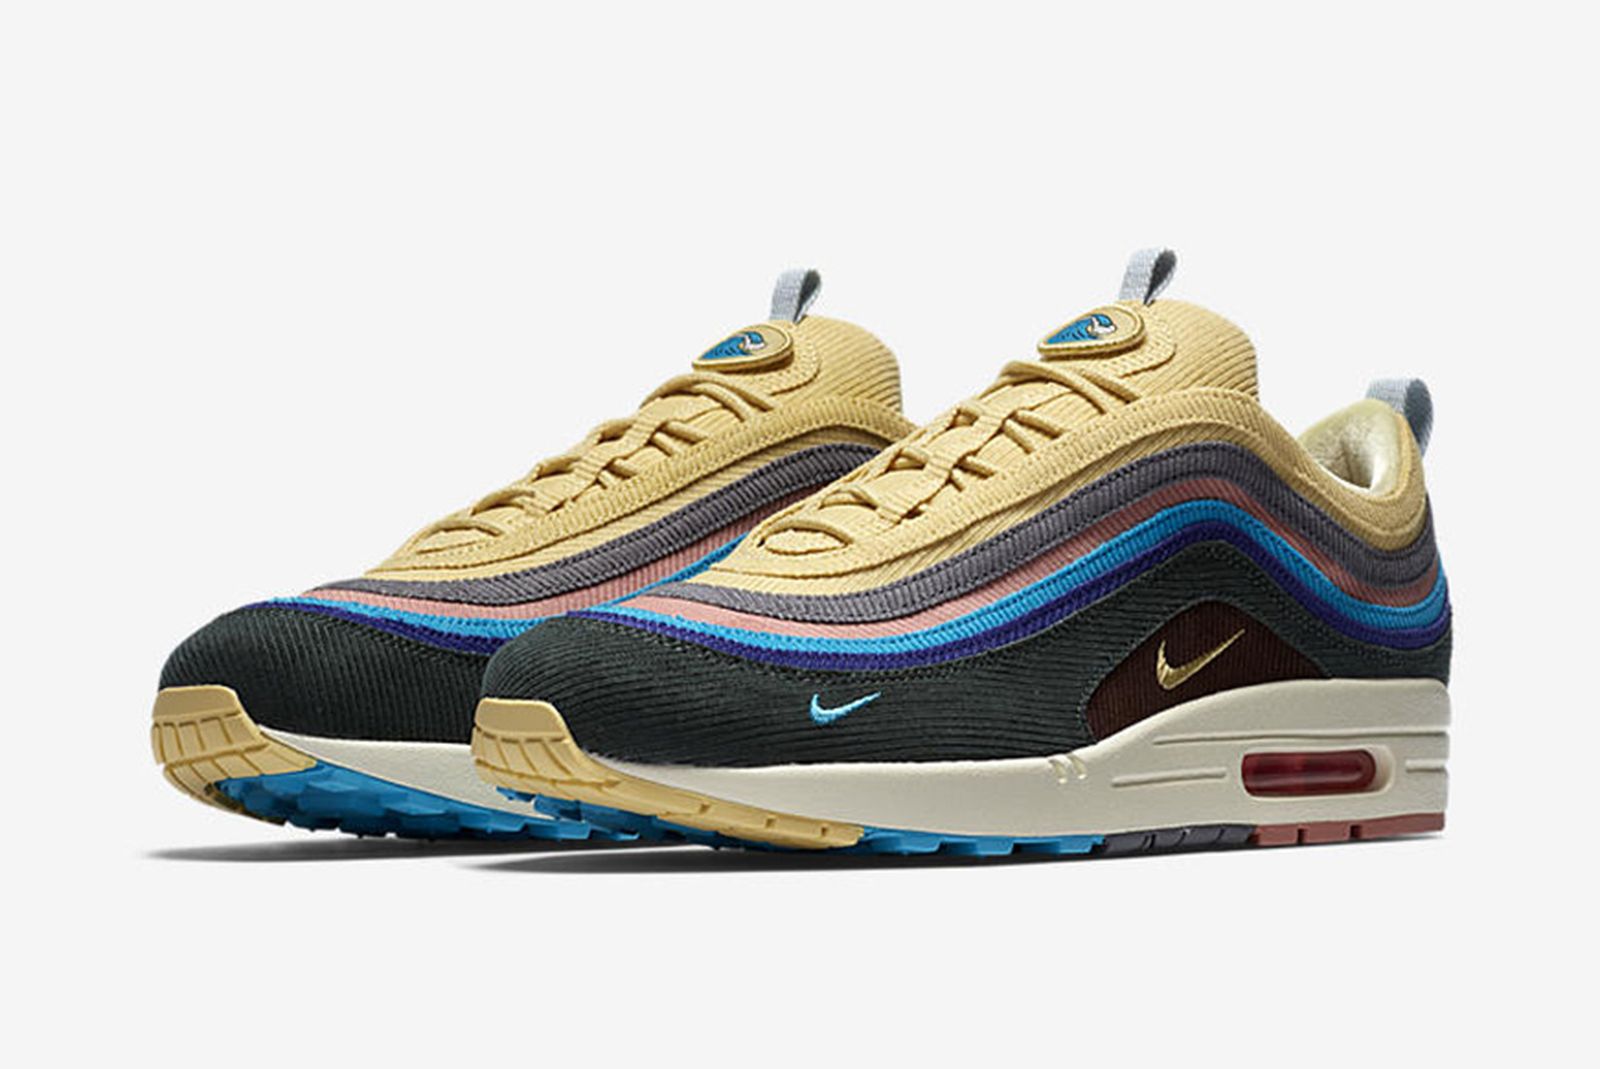 Sean Wotherspoon x Nike Air Max 1/97: Release Date, Price, Info